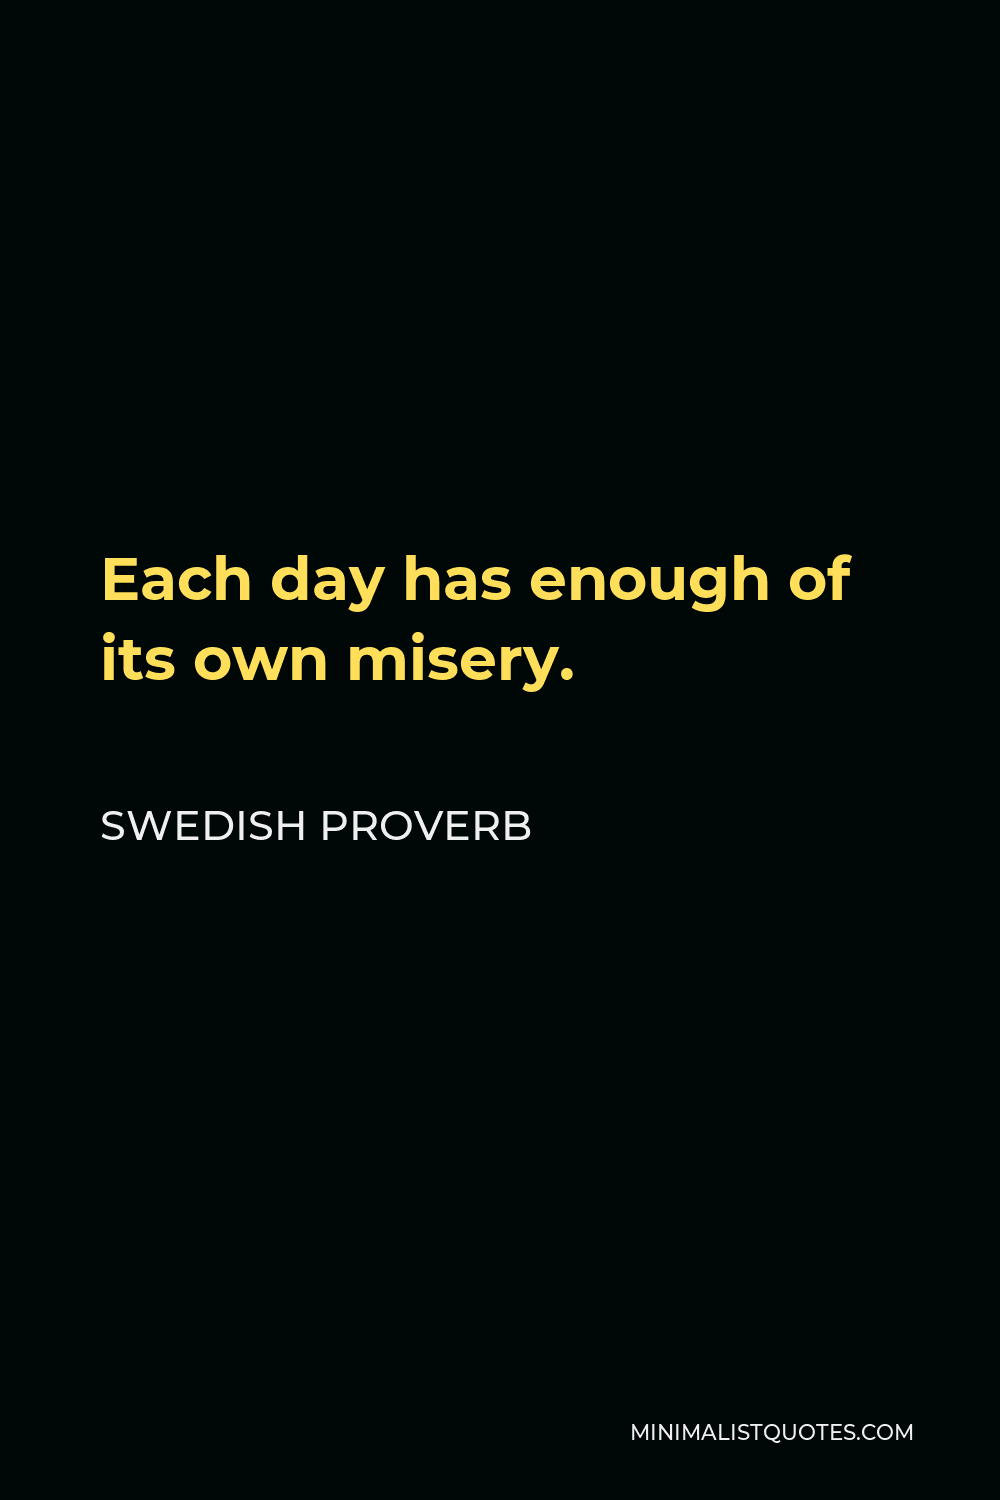 Swedish Proverb Quote - Each day has enough of its own misery.